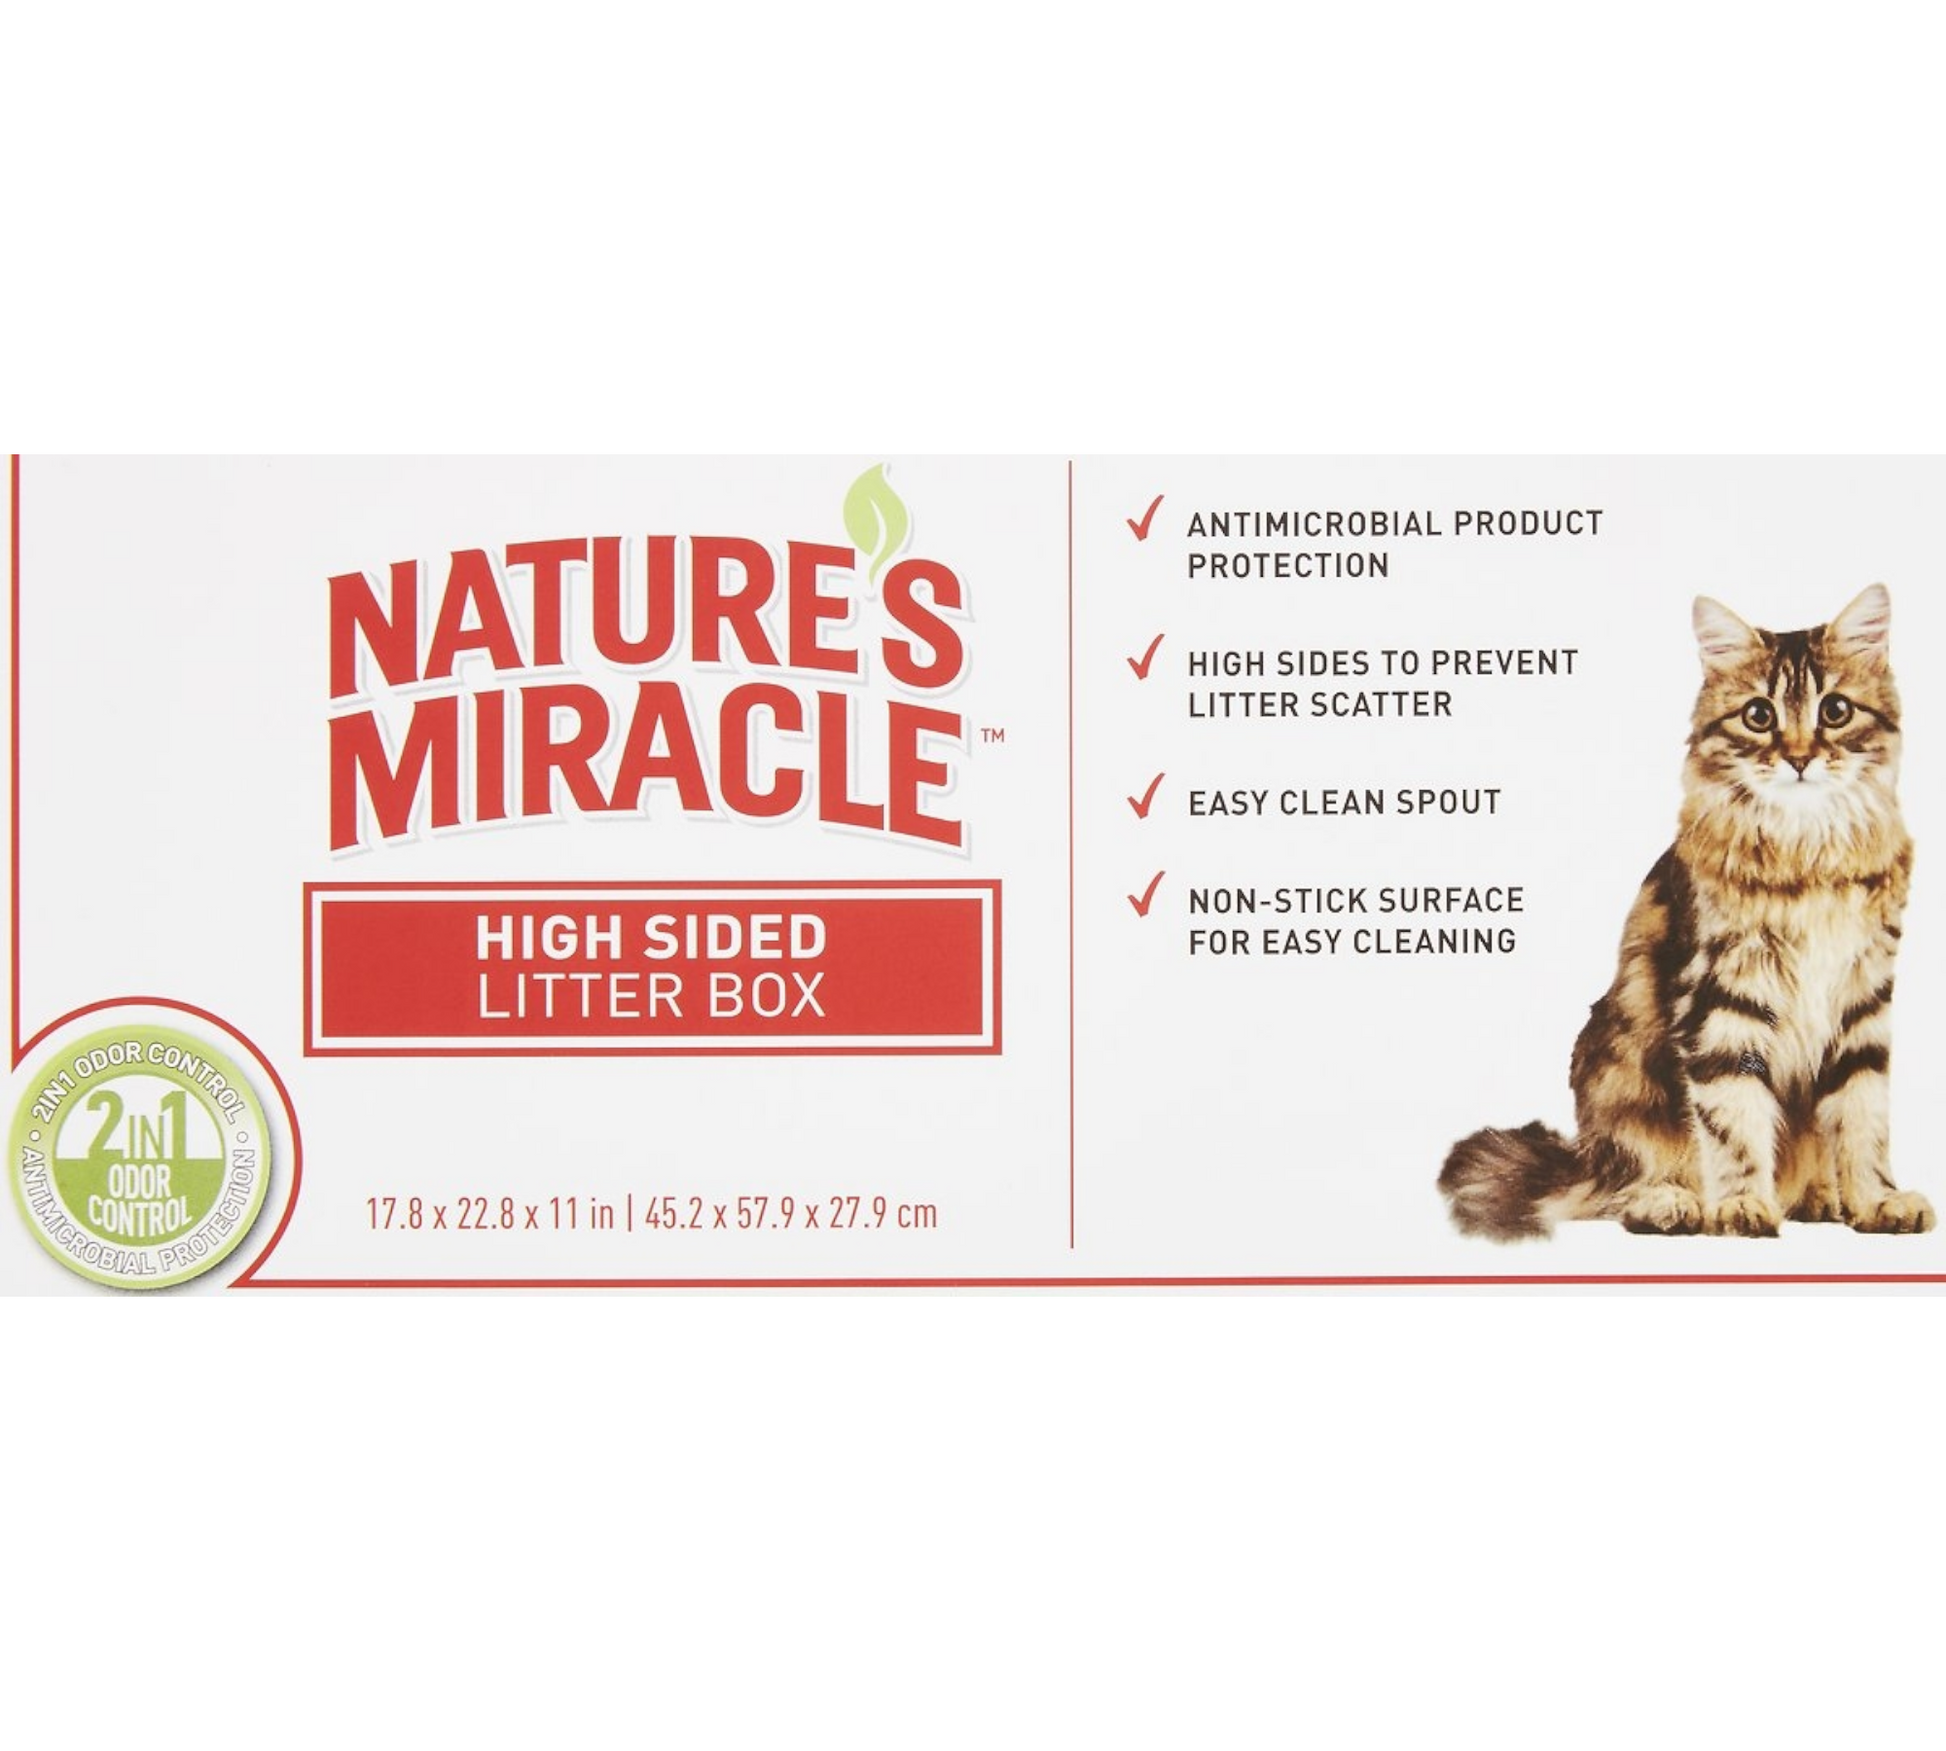 Canine's World Cat Litter Boxes Nature's Miracle High Side Plastic Litter Pan Natures Miracle